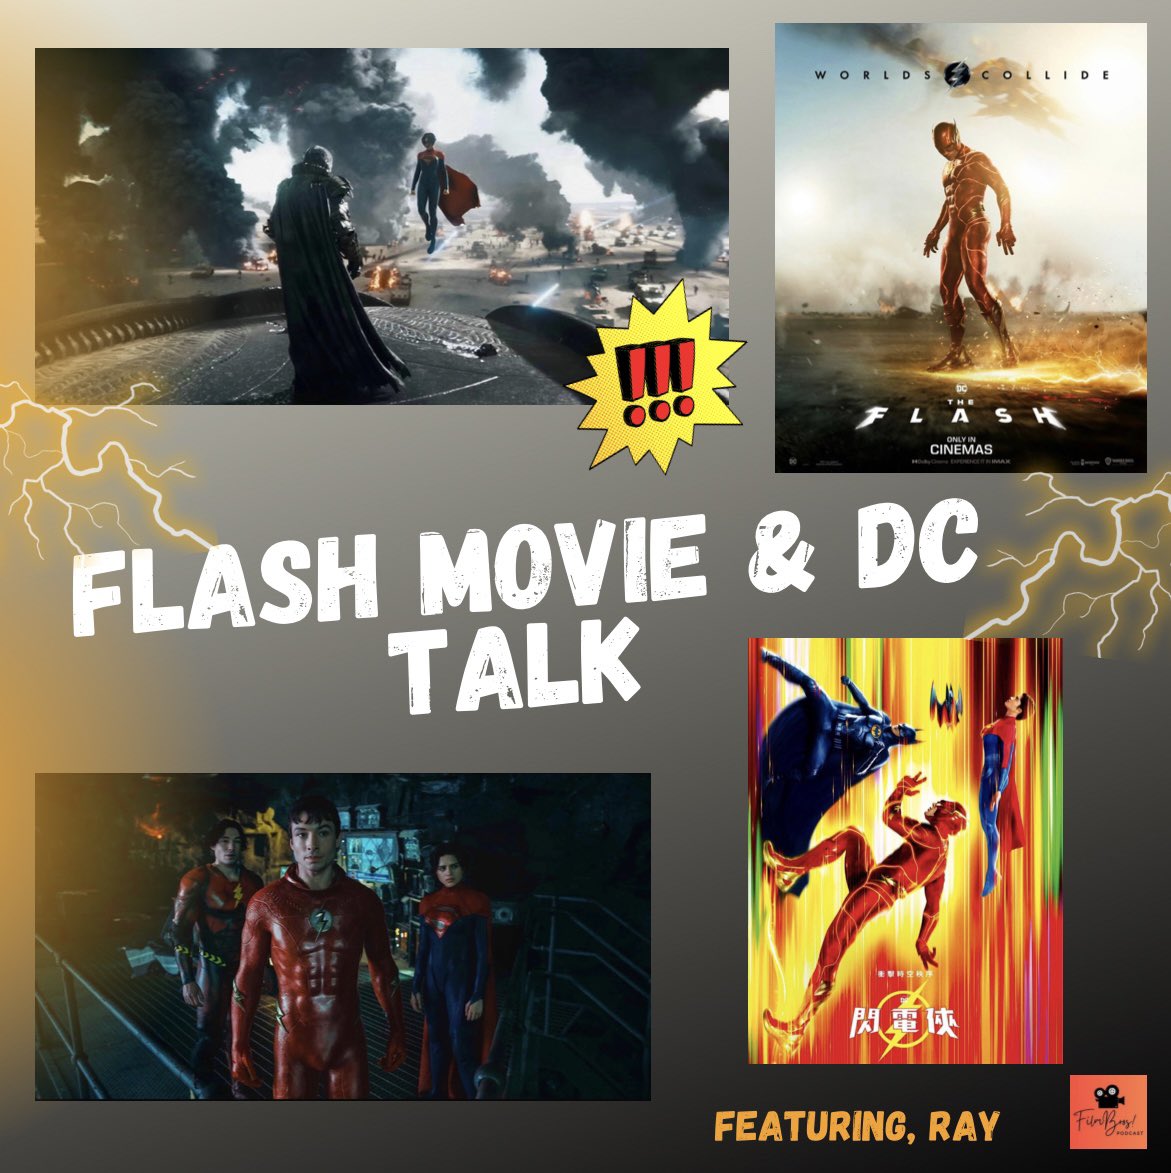 Tune in todays episode dropping at 2 pm. It’s one for the books, special guest! Link in our bio, apple podcast and Spotify!! #flashmovie #cinema #dcuniverse #applepodcasts #spotify🎧 #podcasting #specialguest #batman #supergirl